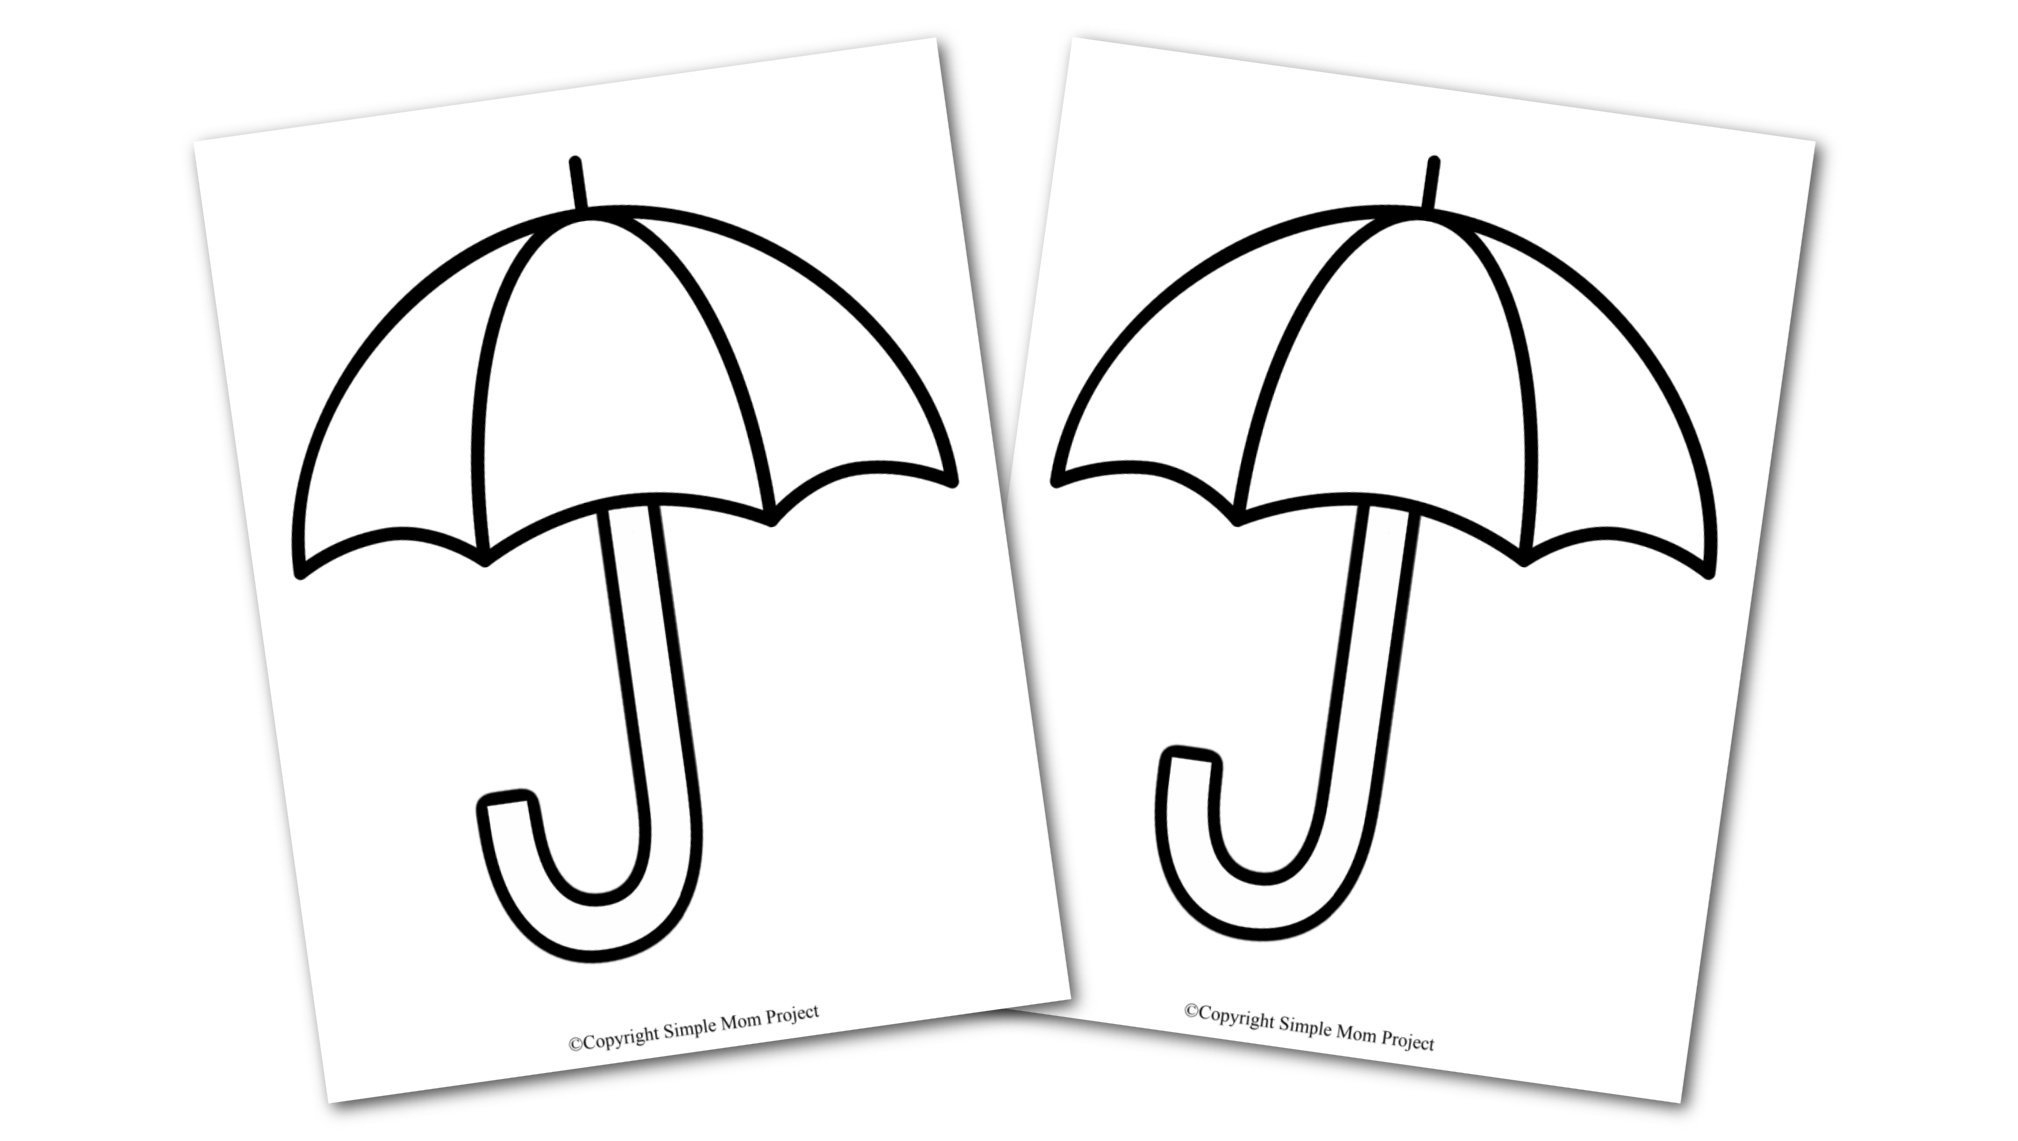 Free Printable Umbrella Template - Simple Mom Project With Regard To Blank Umbrella Template